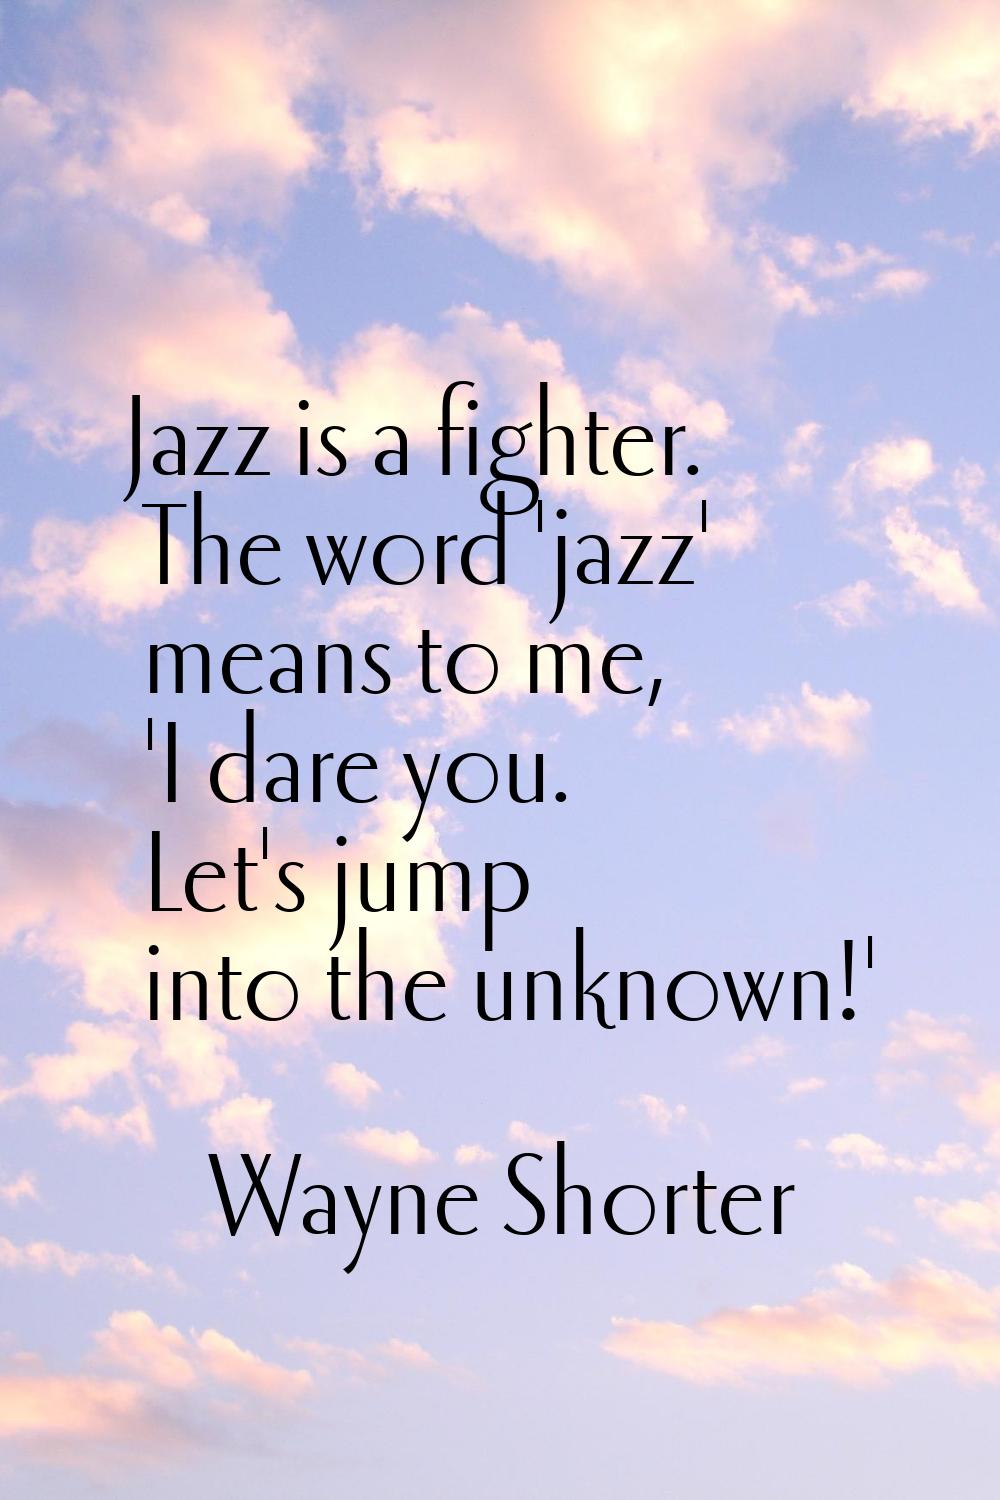 Jazz is a fighter. The word 'jazz' means to me, 'I dare you. Let's jump into the unknown!'